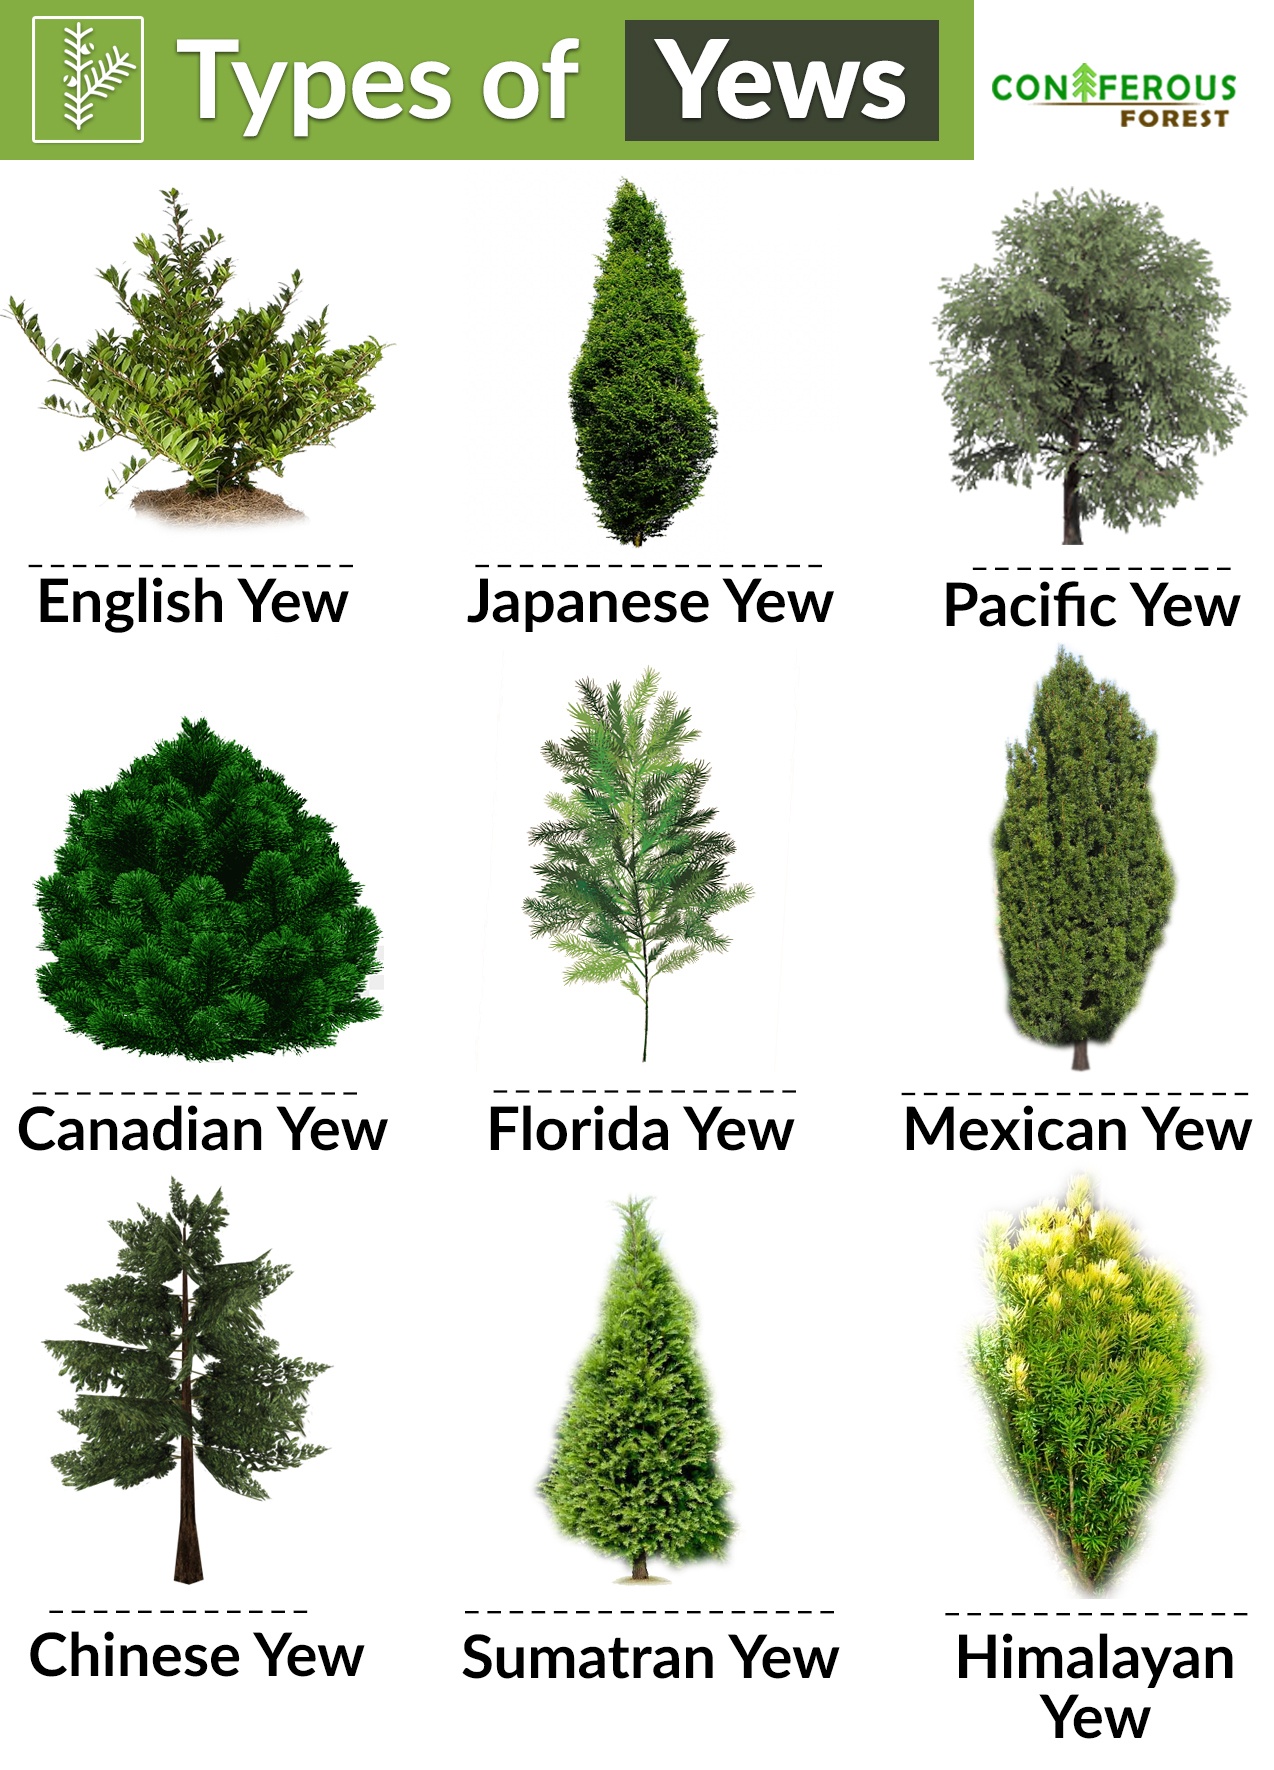 yew tree facts, types, identification, diseases, pictures